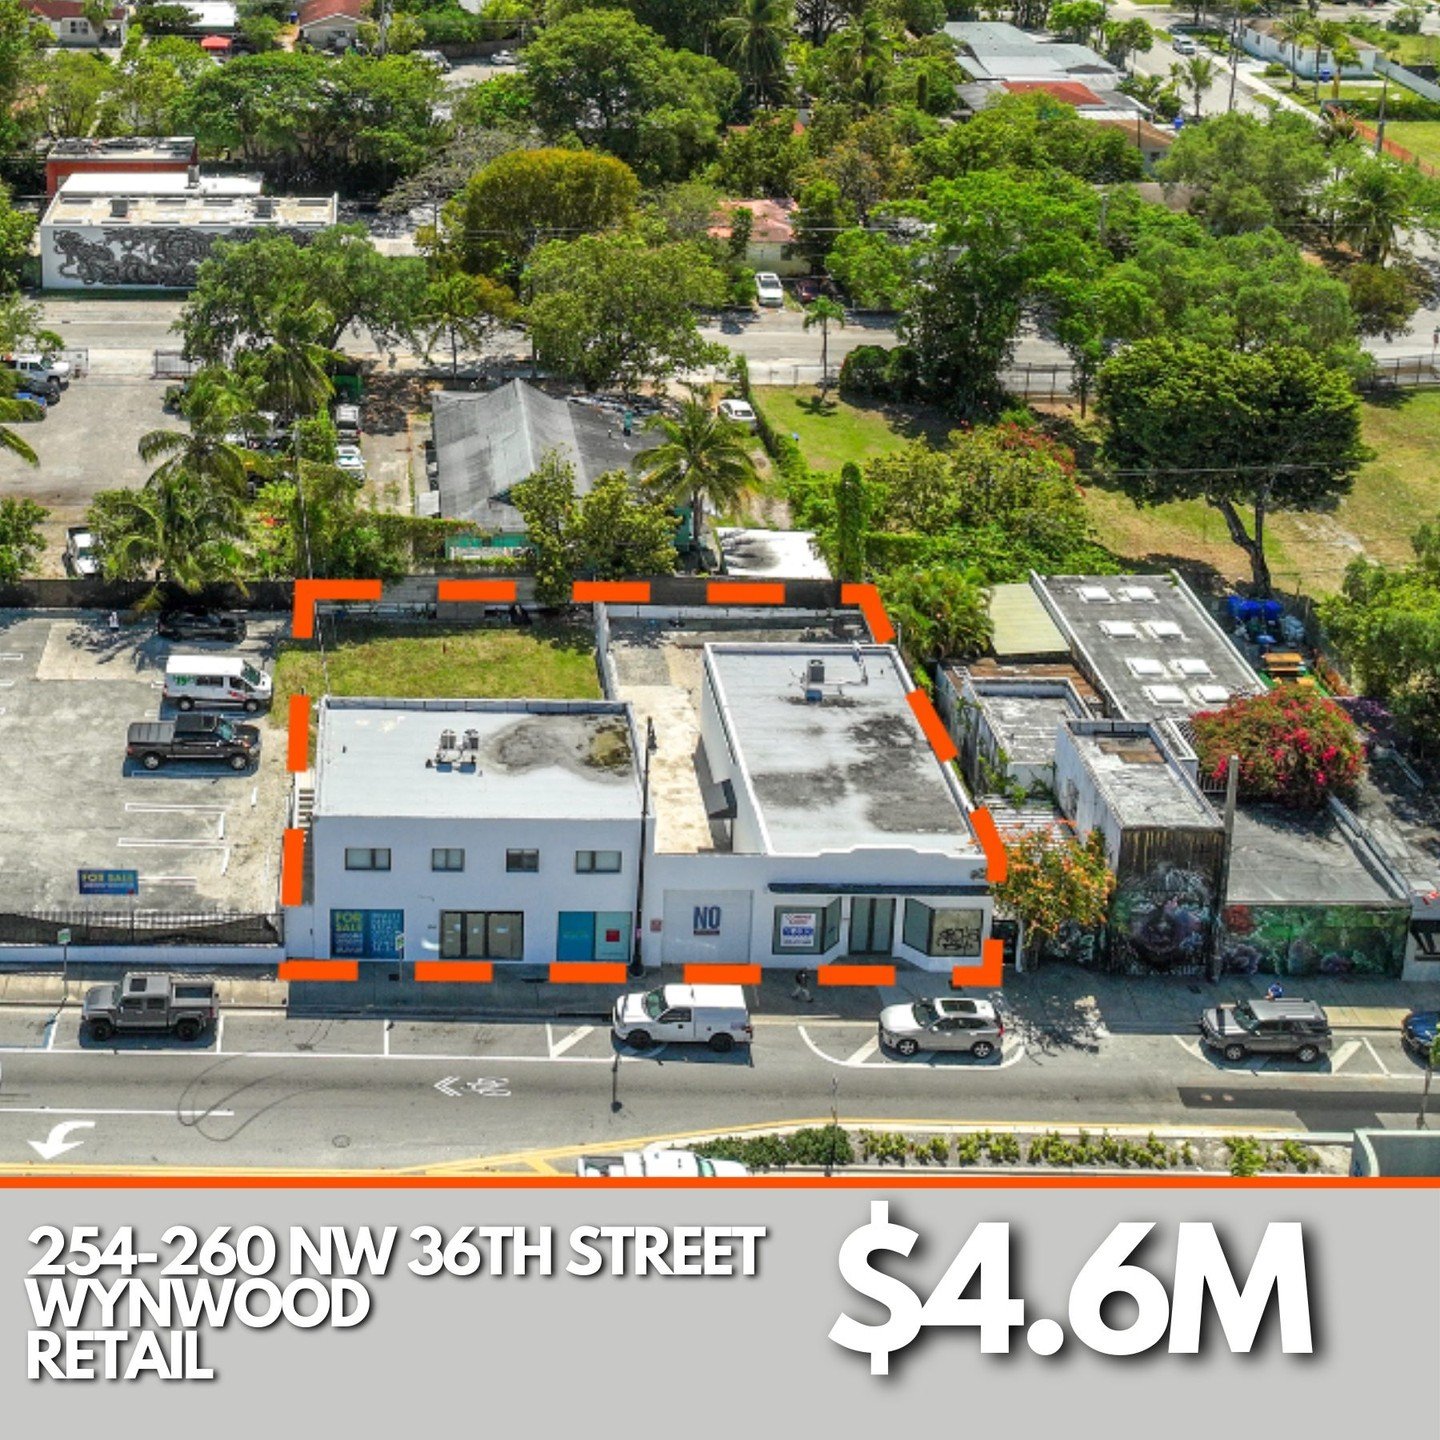 DWNTWN Realty Advisors is pleased to announce $78,500,000 in transaction volume Year-To-Date. Slide through the photos to learn more about the deals.

#JustSold #DWNTWNRealtyAdvisors #MarketLeaders #CommercialRealEstate #SouthFloridaCRE #Miami